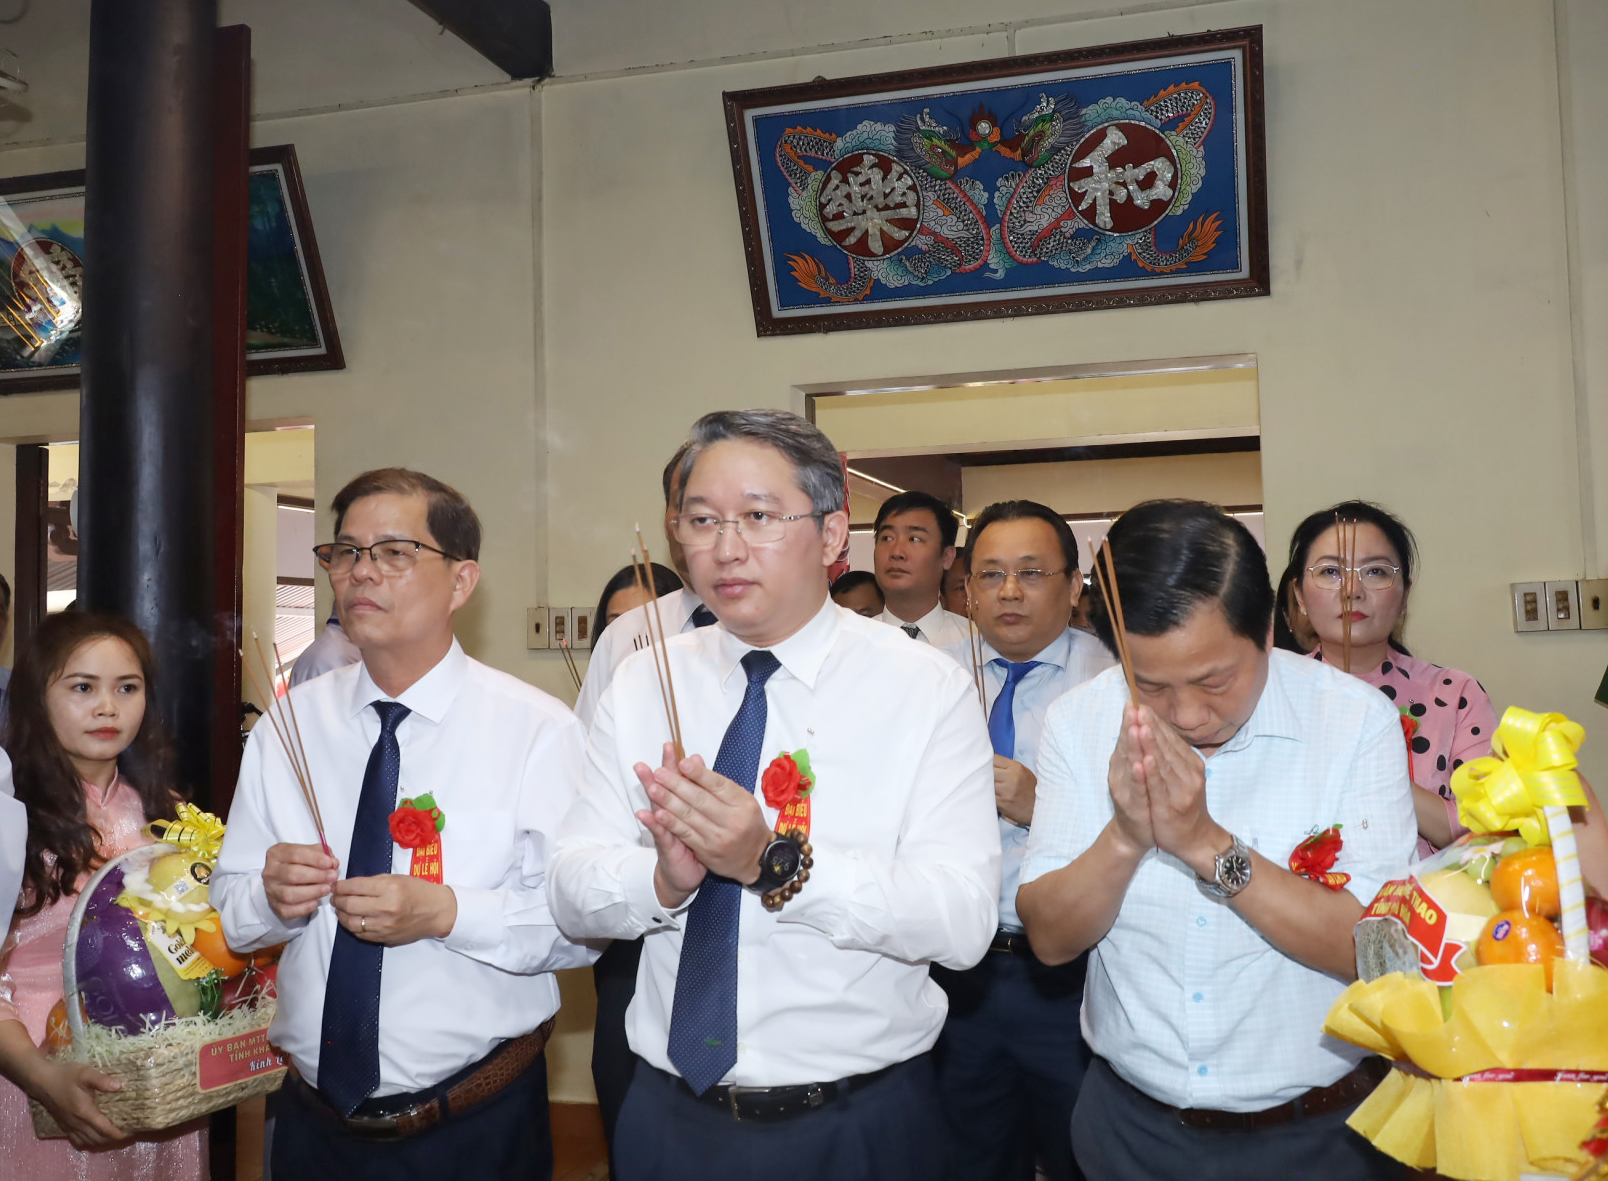 The province’s leaders offer incense to Thien Y Ana Holy Mother

